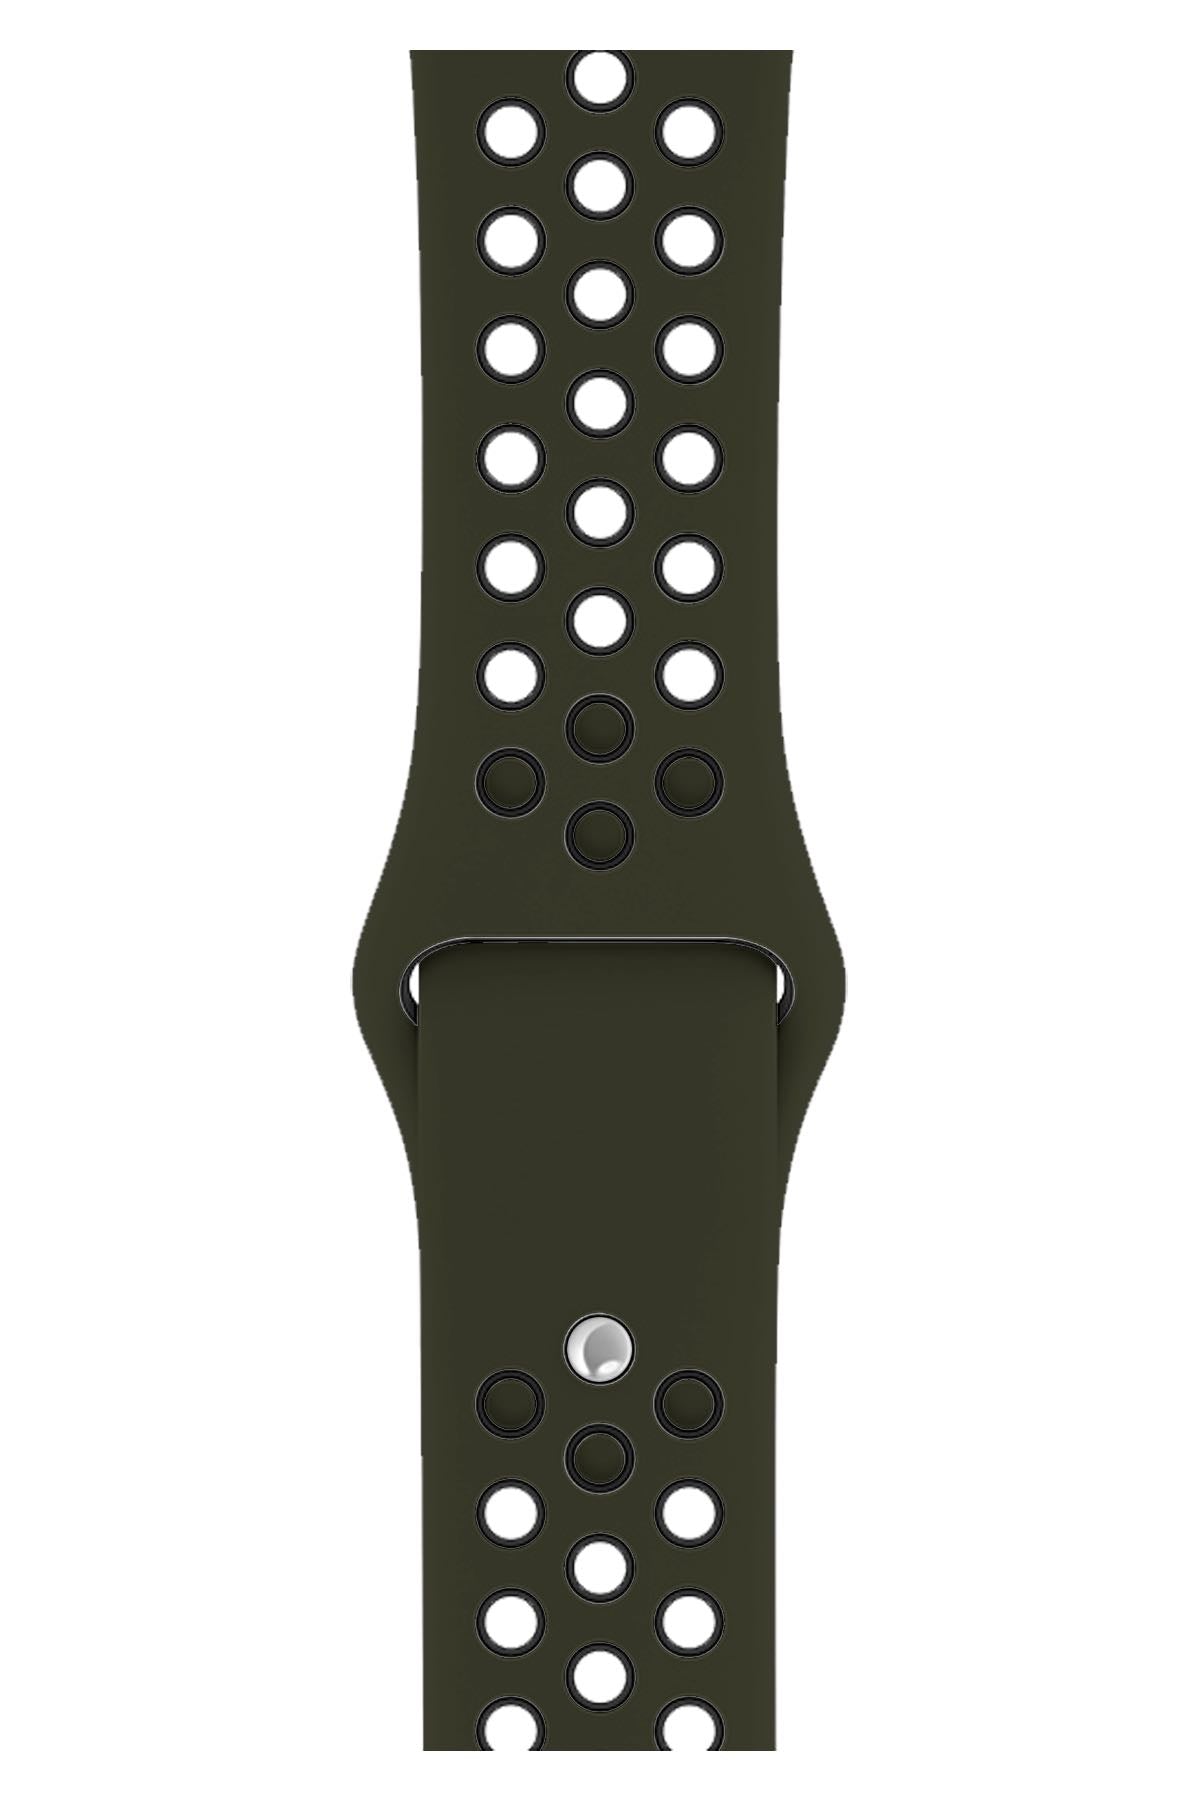 Apple Watch Compatible Silicone Perforated Sport Band Olive Green 